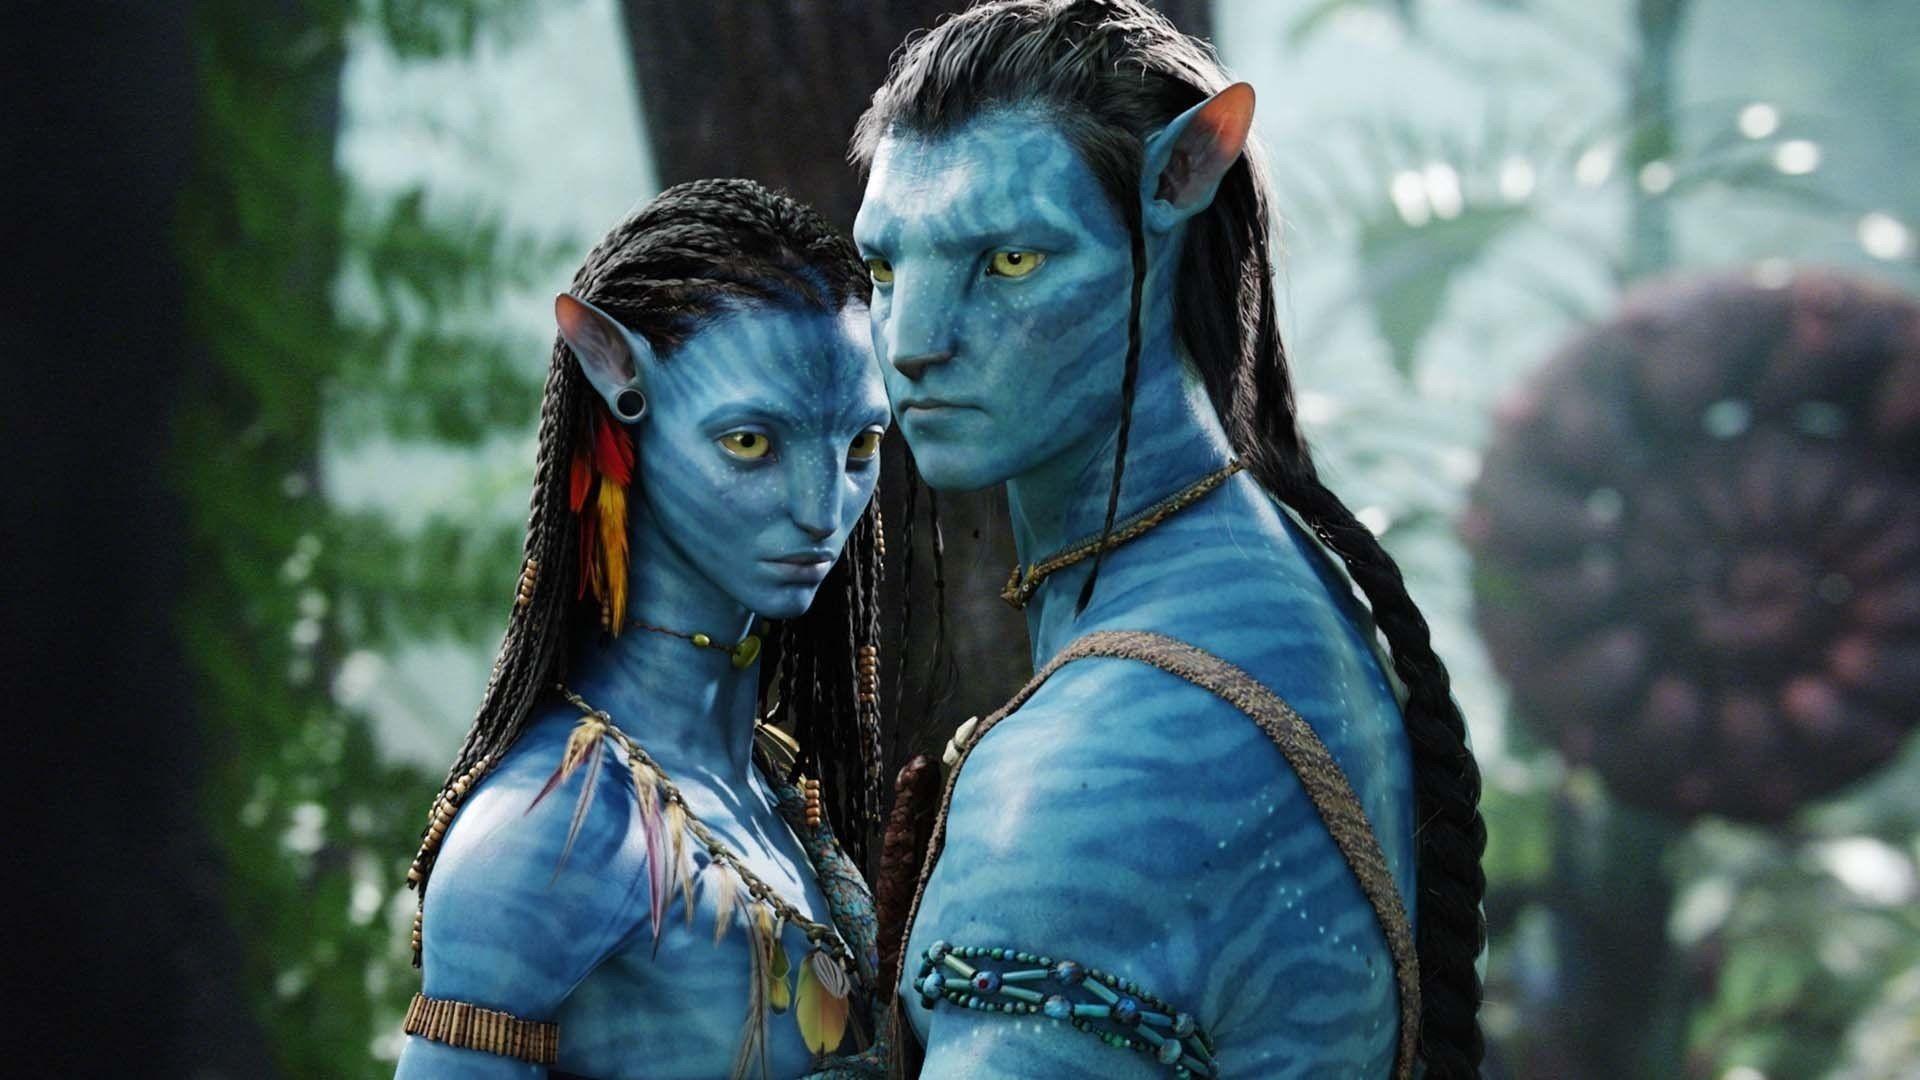 FREEHD Avatar 2 The Way of Water Download FullMovie Watch Online  Athome  Podcast on SoundOn